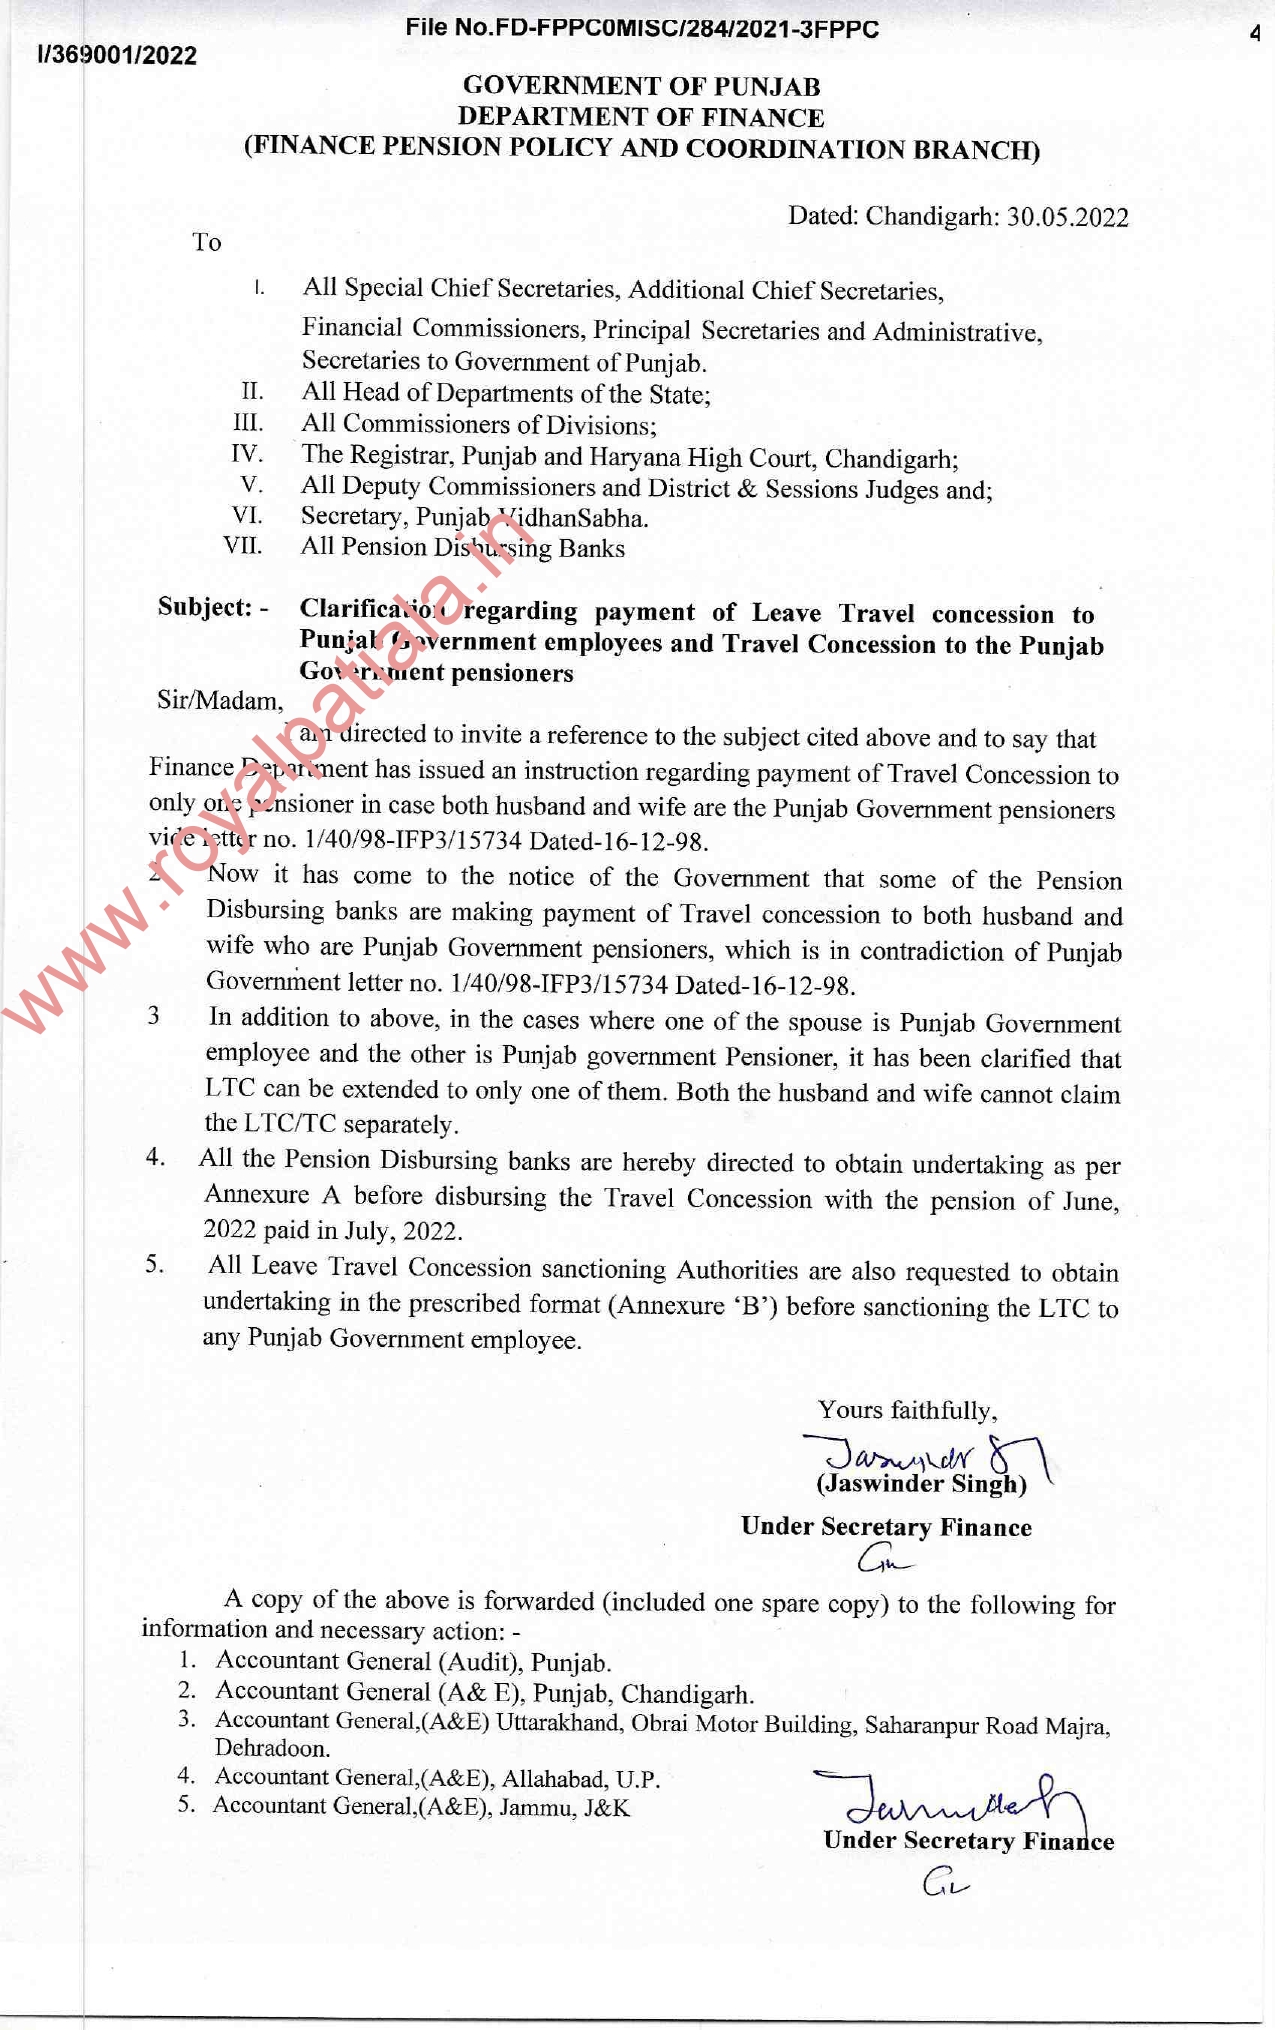 Punjab govt issue clarification on payment of LTC and TC to pensioners 